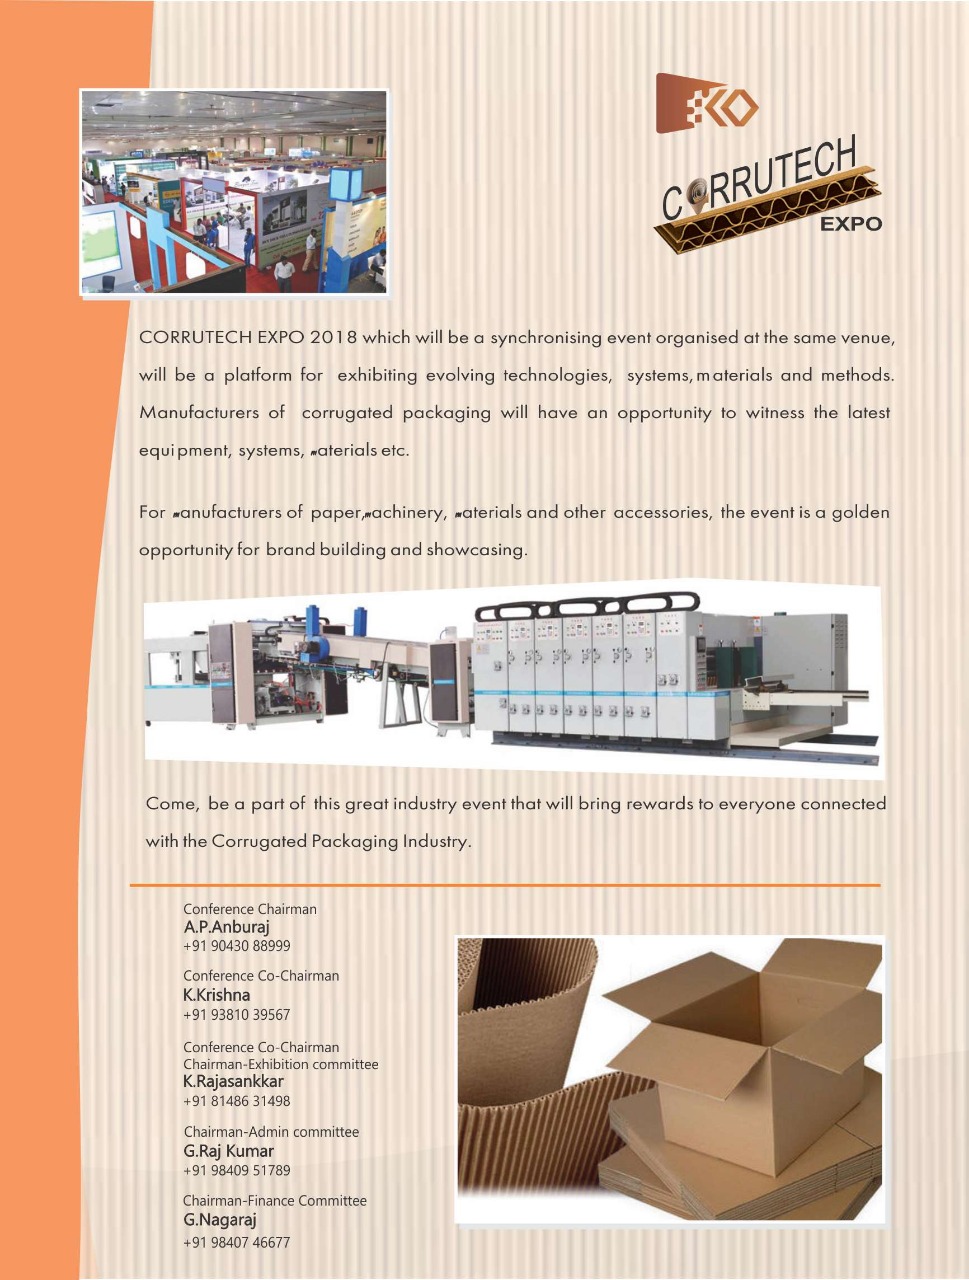 47th CONFERENCE OF FEDERTION OF CORRUGATED BOX MANUFATURESS OF INDIA